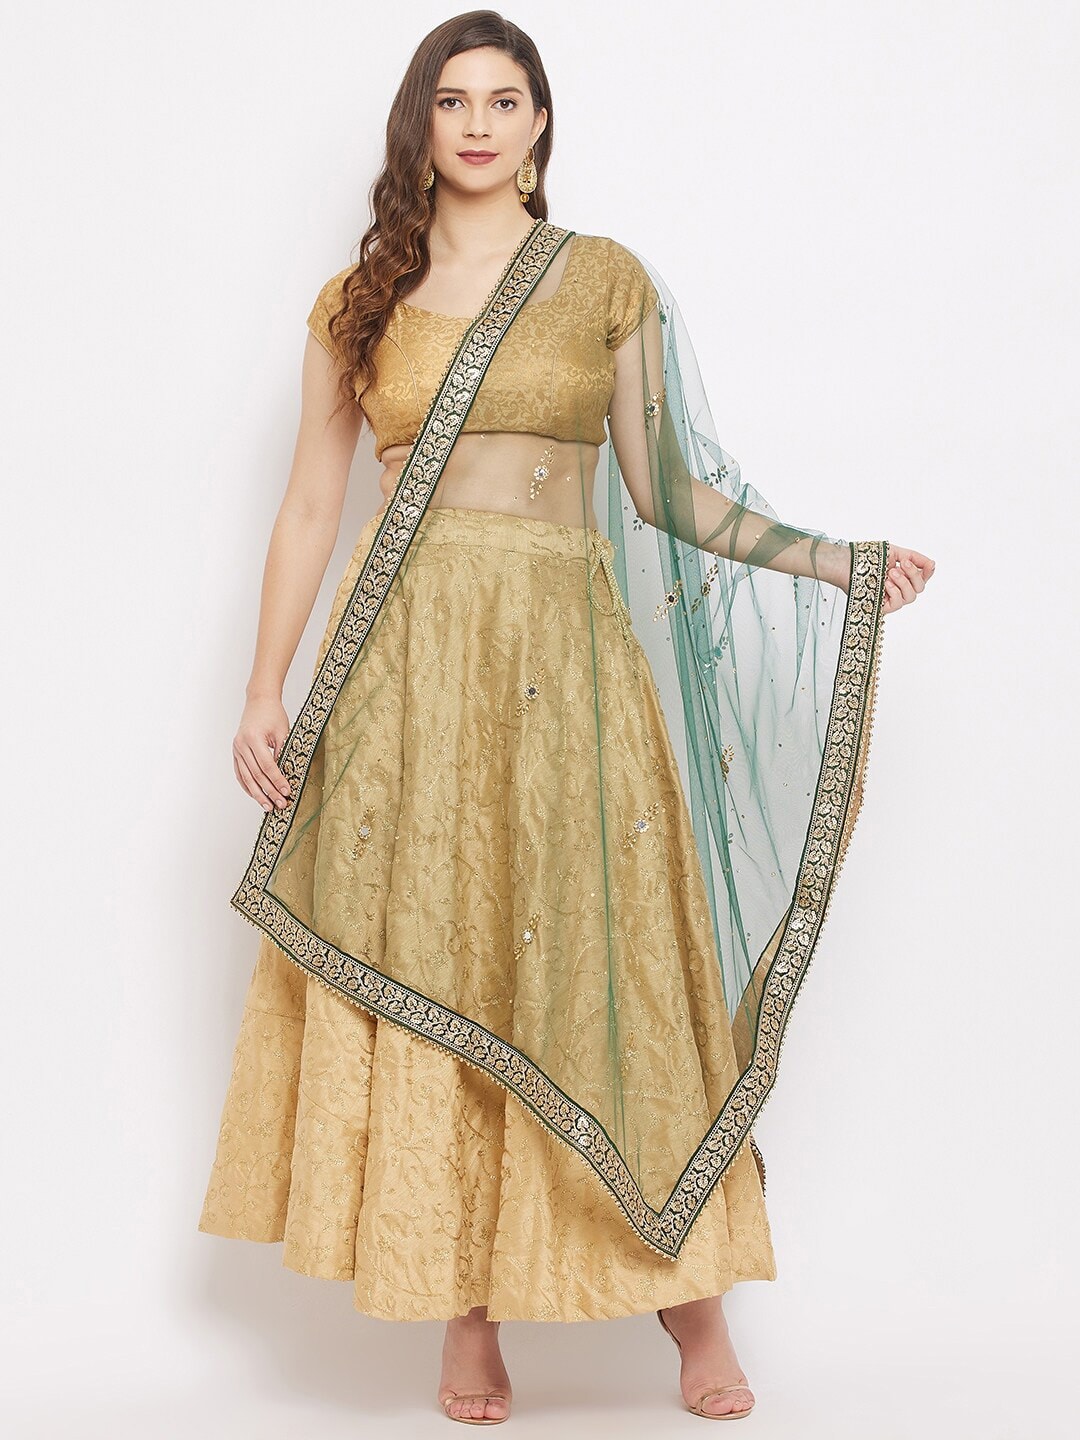 Clora Creation Green & Gold-Toned Embroidered Dupatta with Beads and Stones Price in India